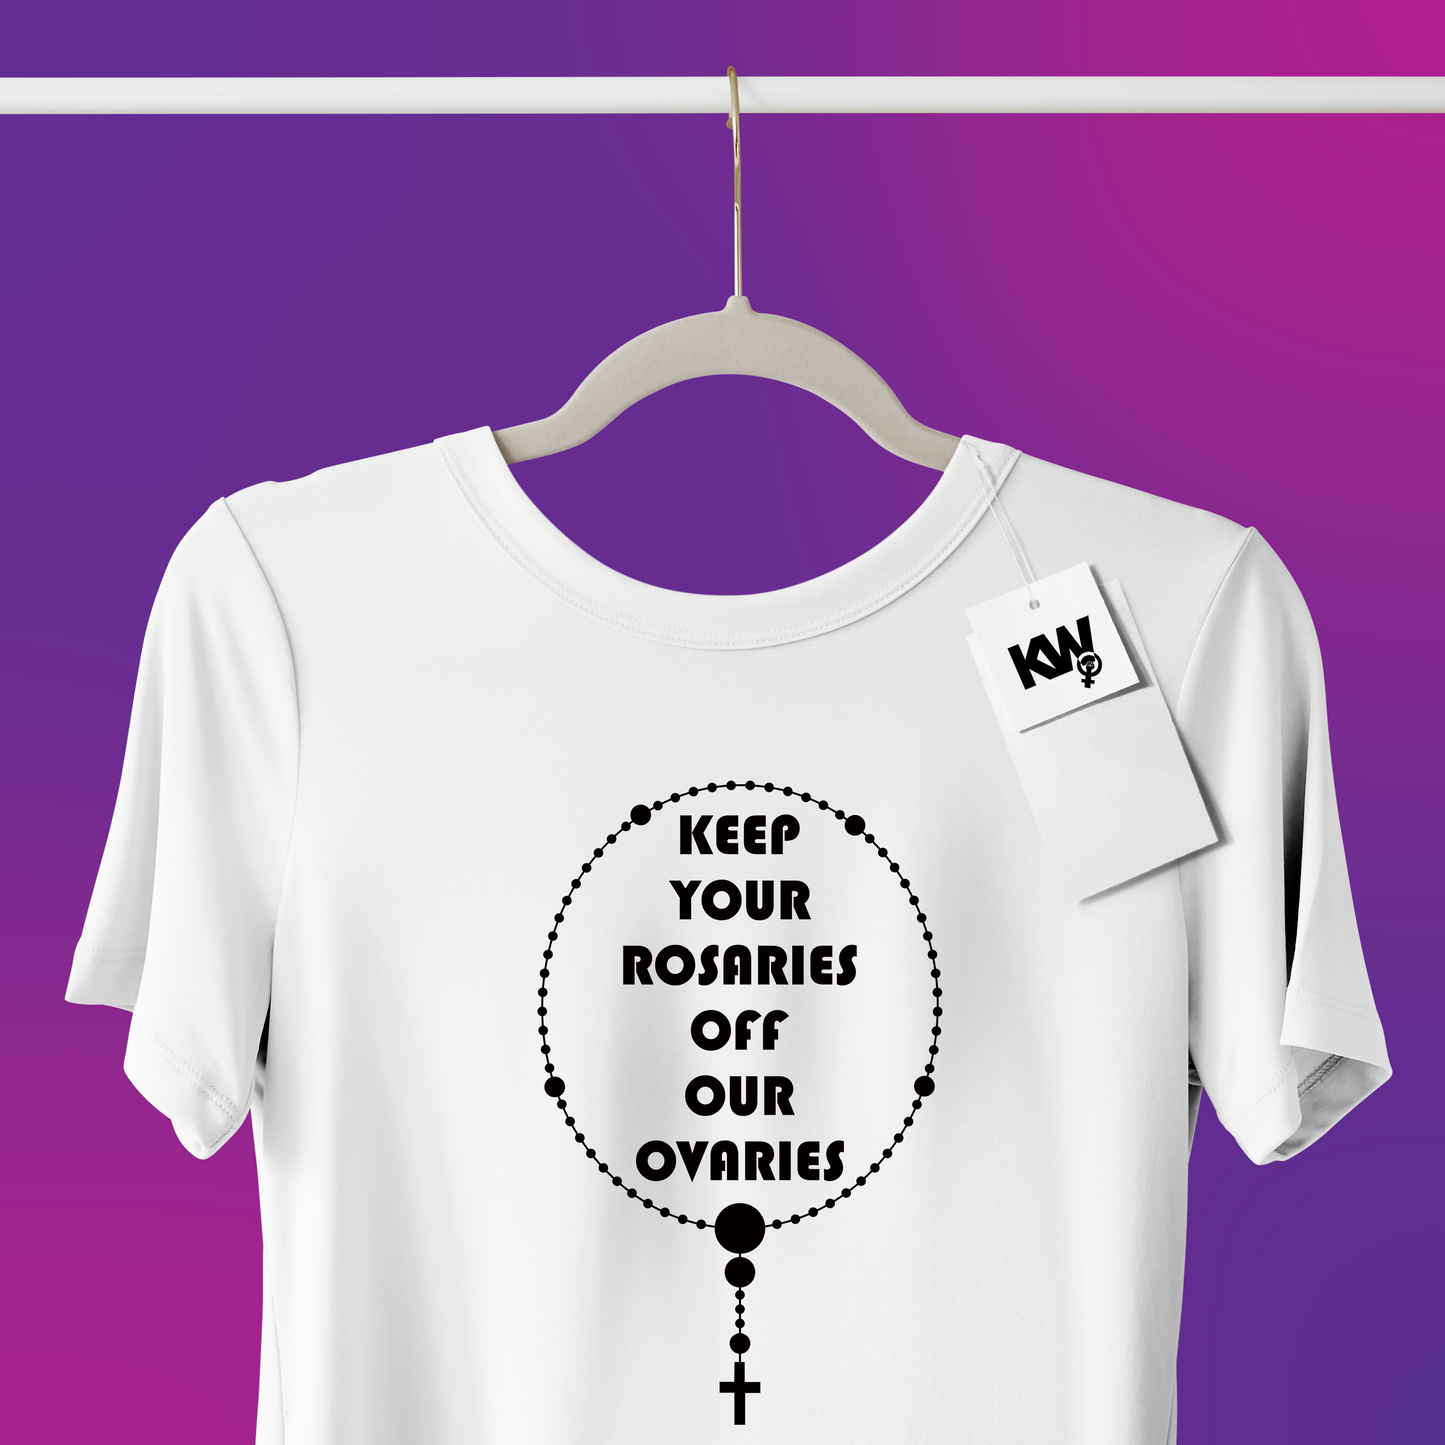 T-Shirt with "KEEP YOUR ROSARIES OFF OUR OVARIES" hand screenprint.